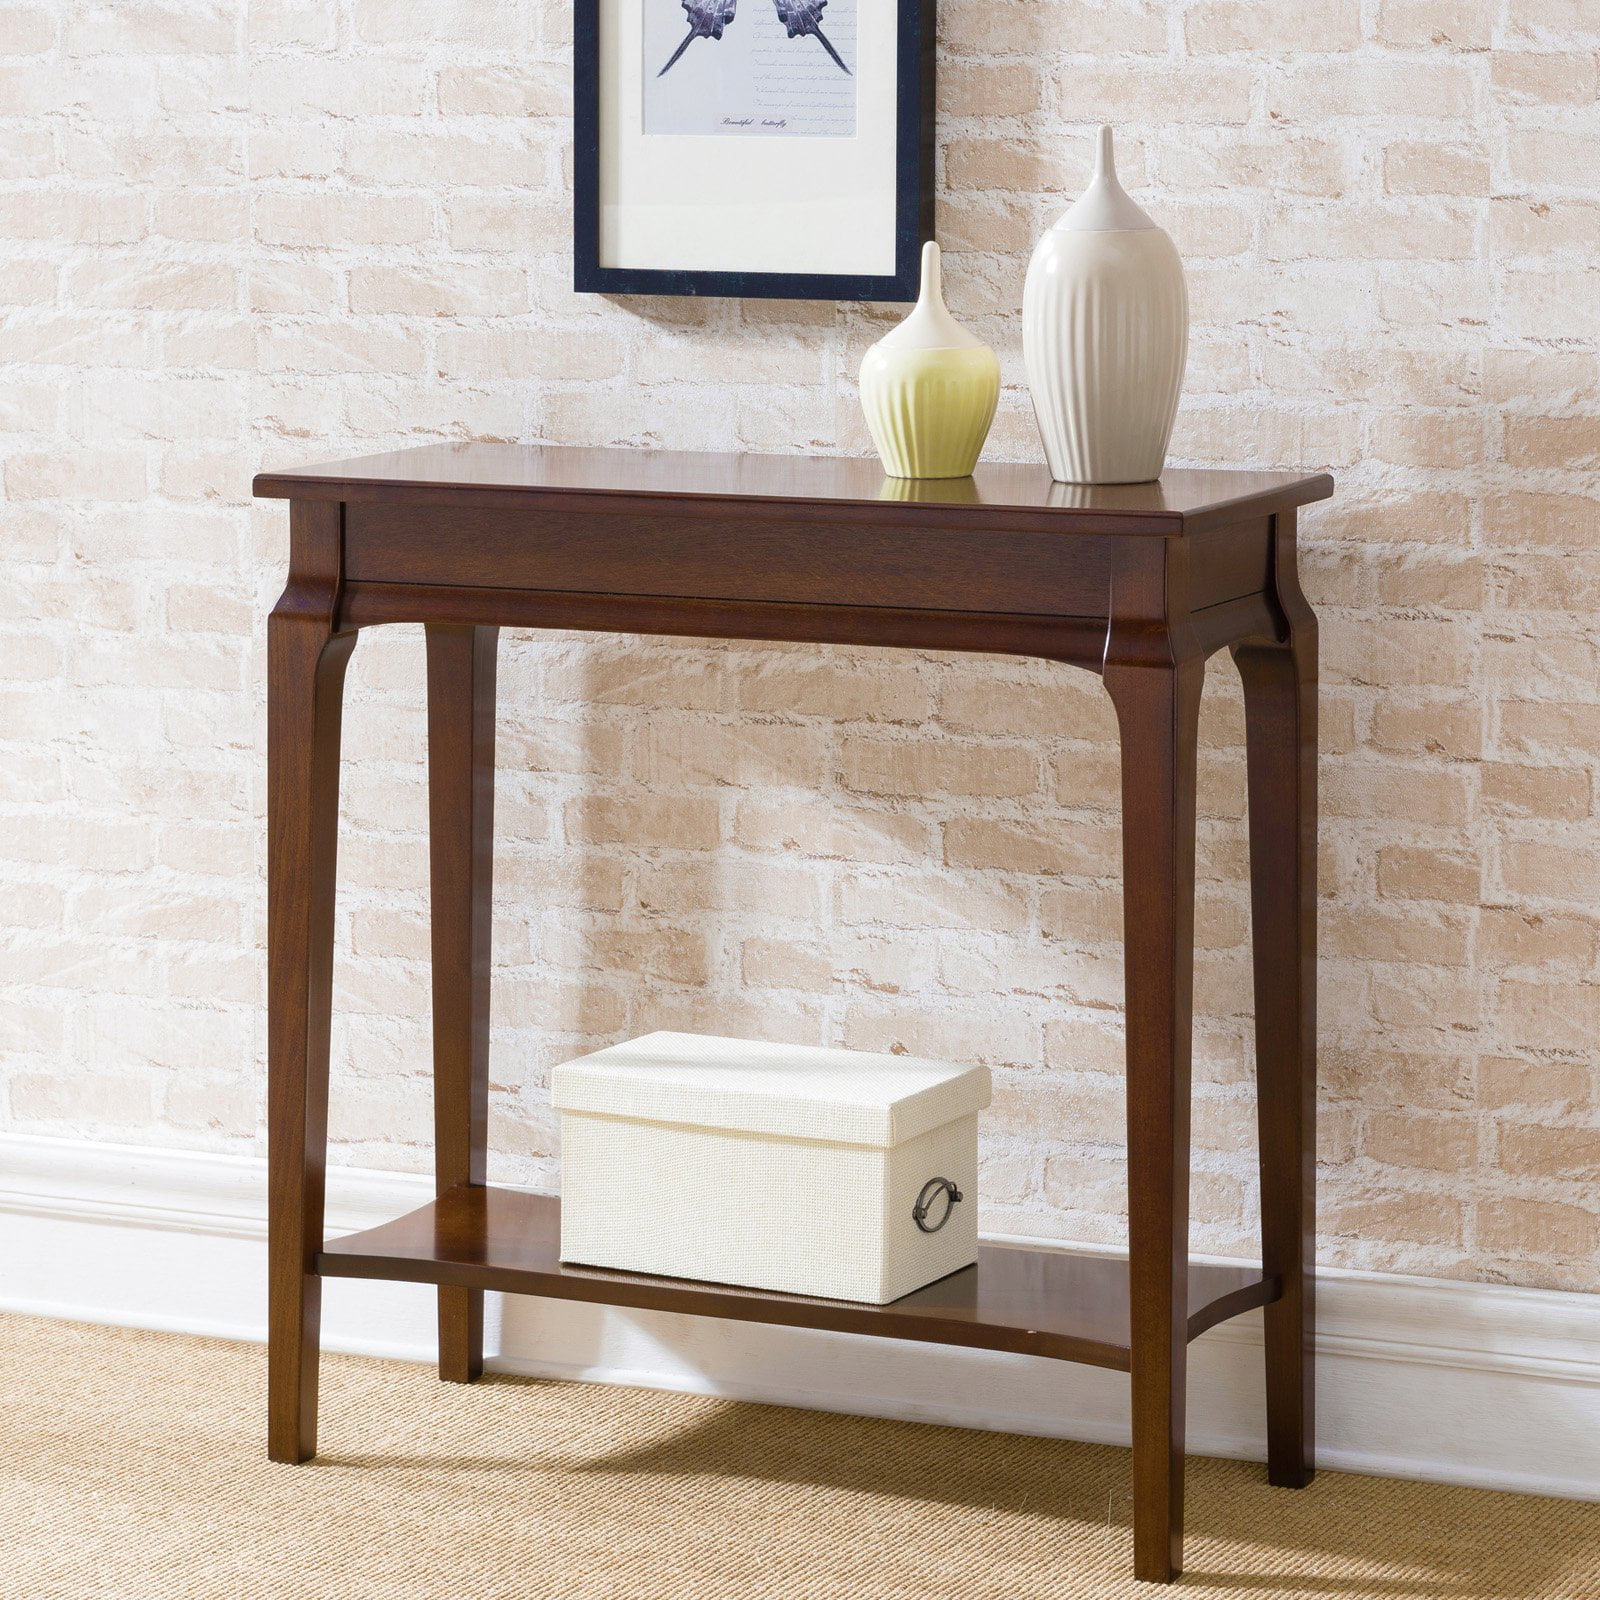 Leick Home Stratus Hall Stand  Console Table  Walmart com 